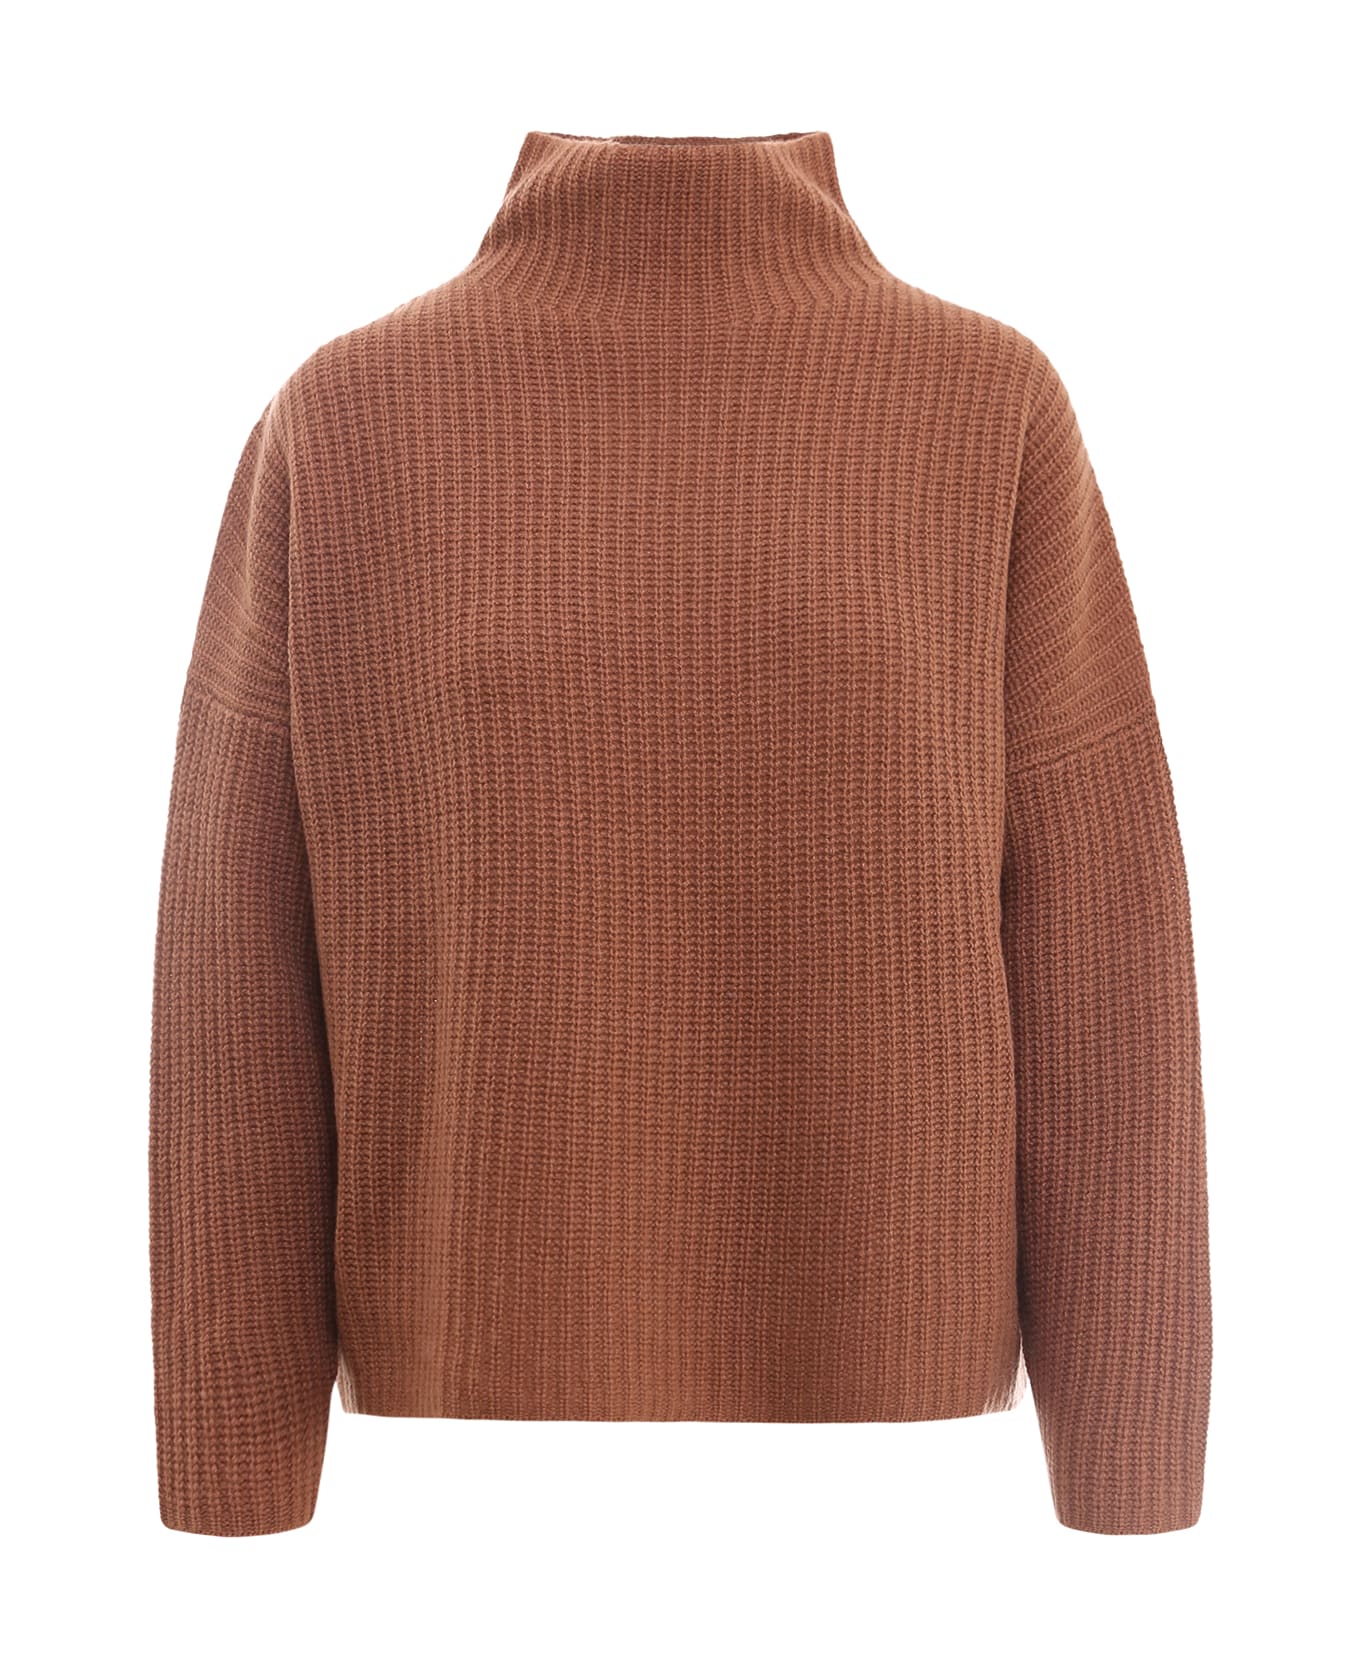 360Cashmere Sweater - Brown